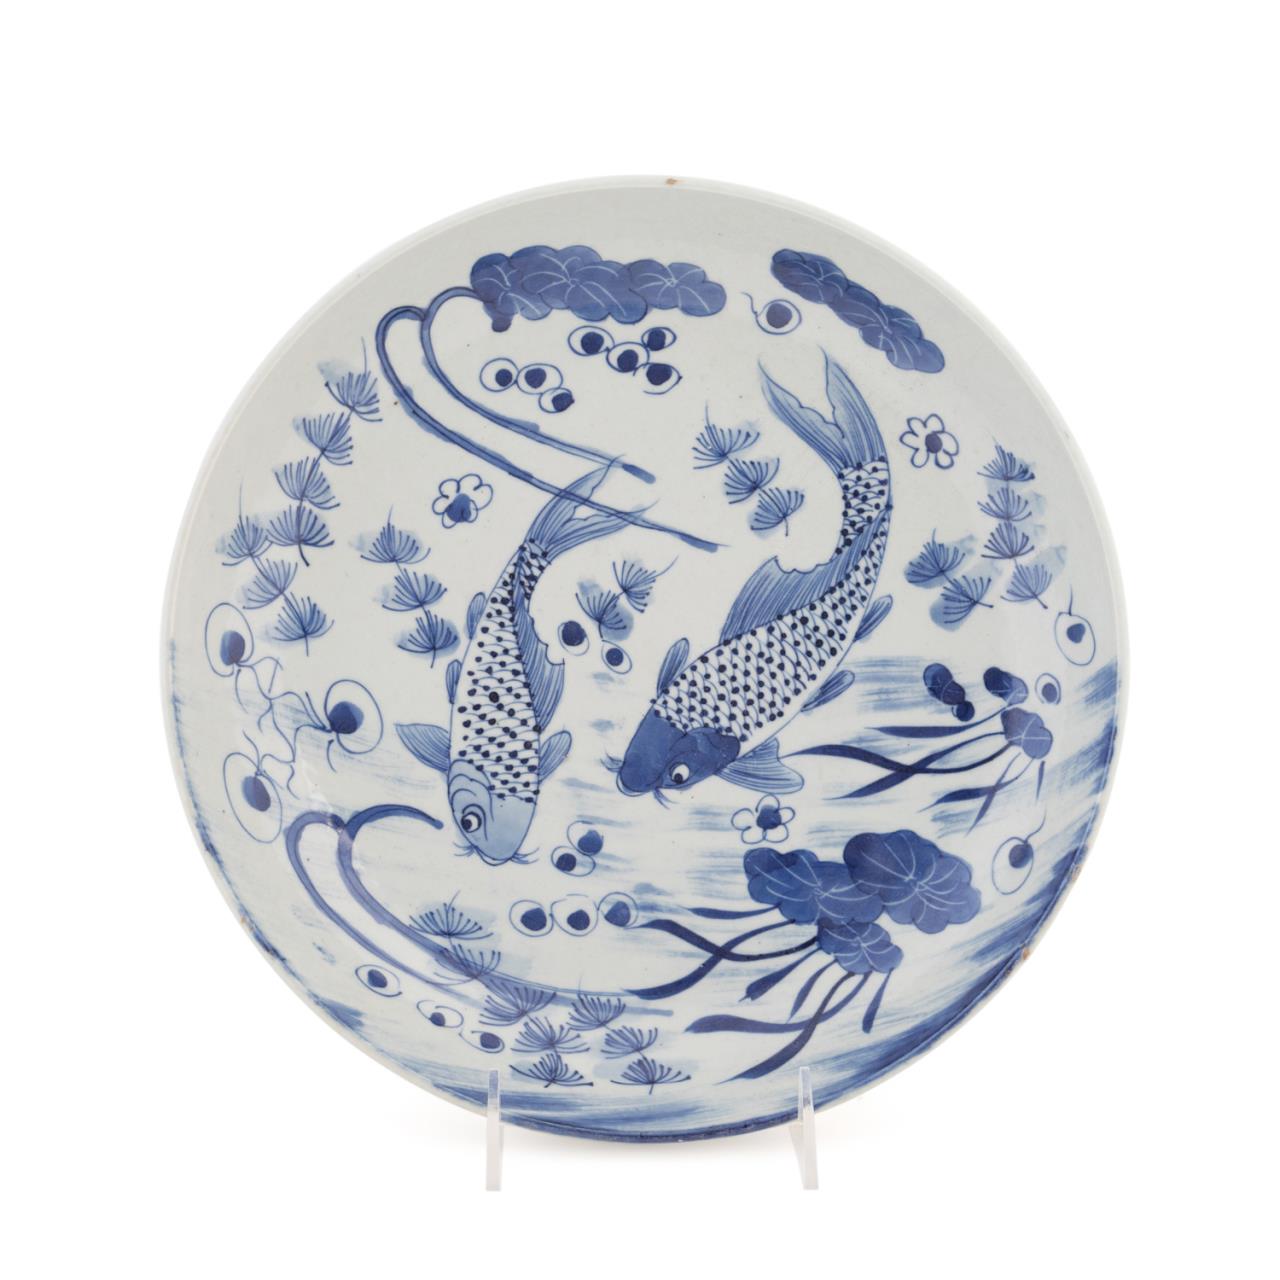 CHINESE BLUE AND WHITE LOTUS POND 2bfb87